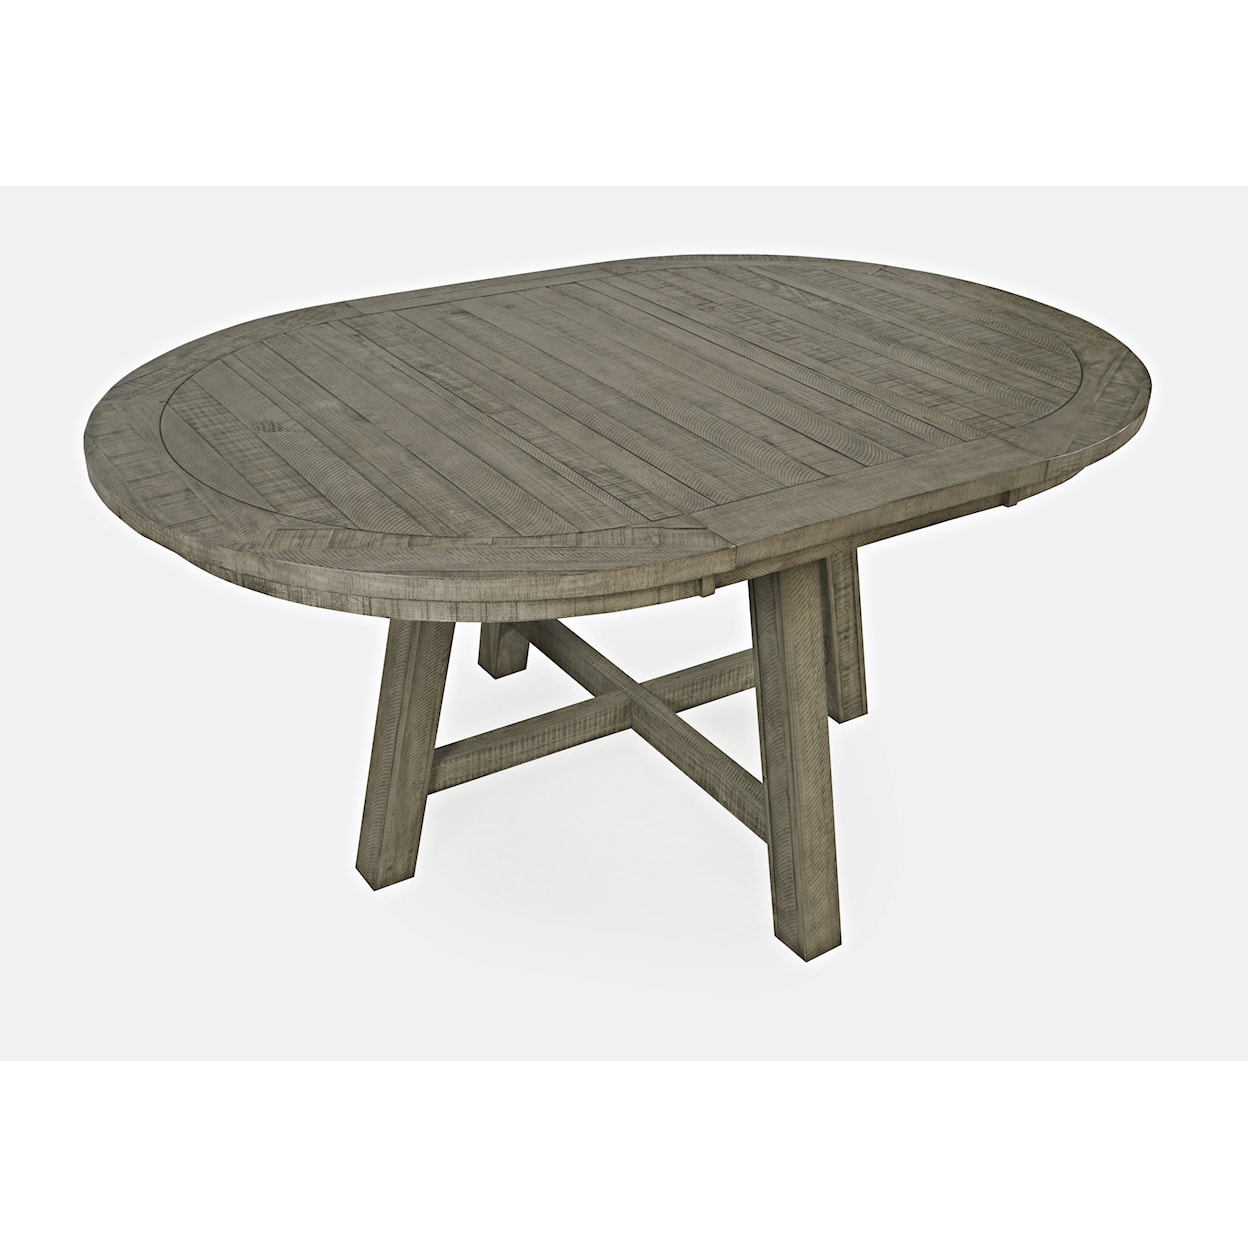 Jofran Telluride Counter Height Dining Table